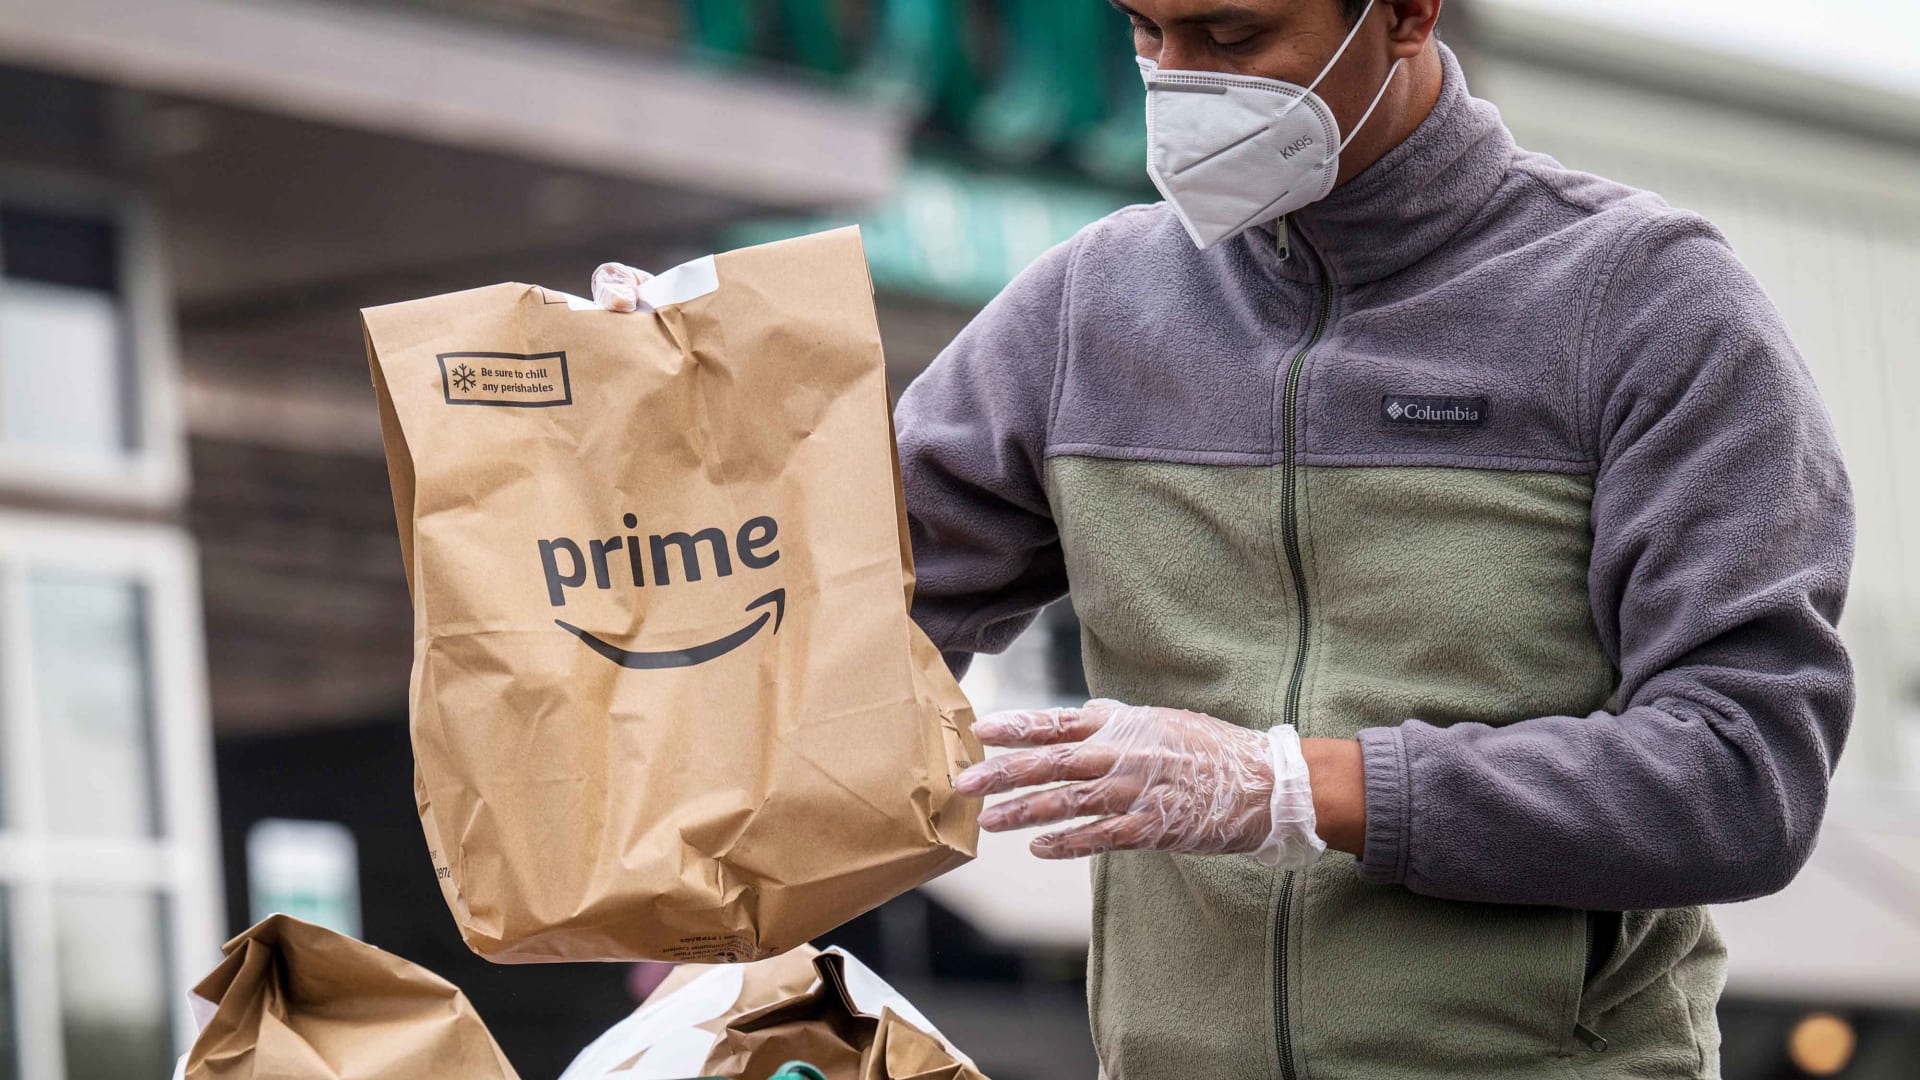 An independent contractor loads Amazon Prime grocery bags into a car outside a Whole Foods Market in Berkeley, California.